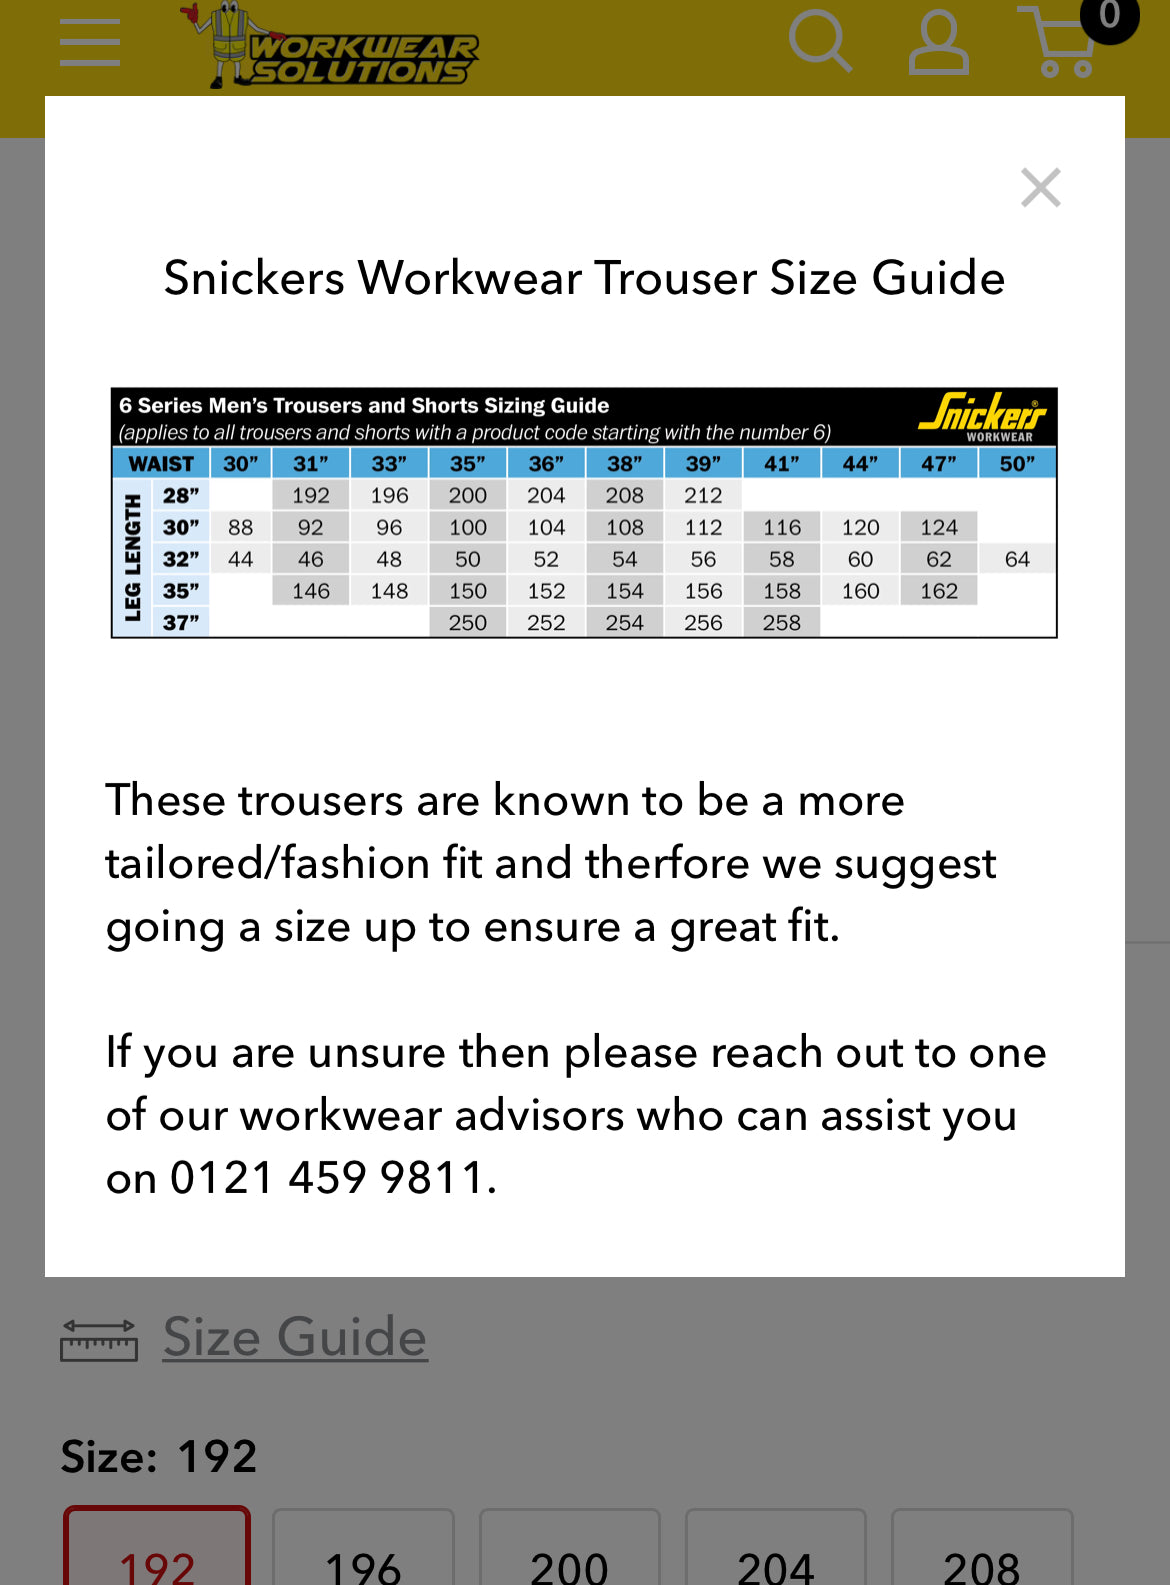 Size guides are on the way!!!